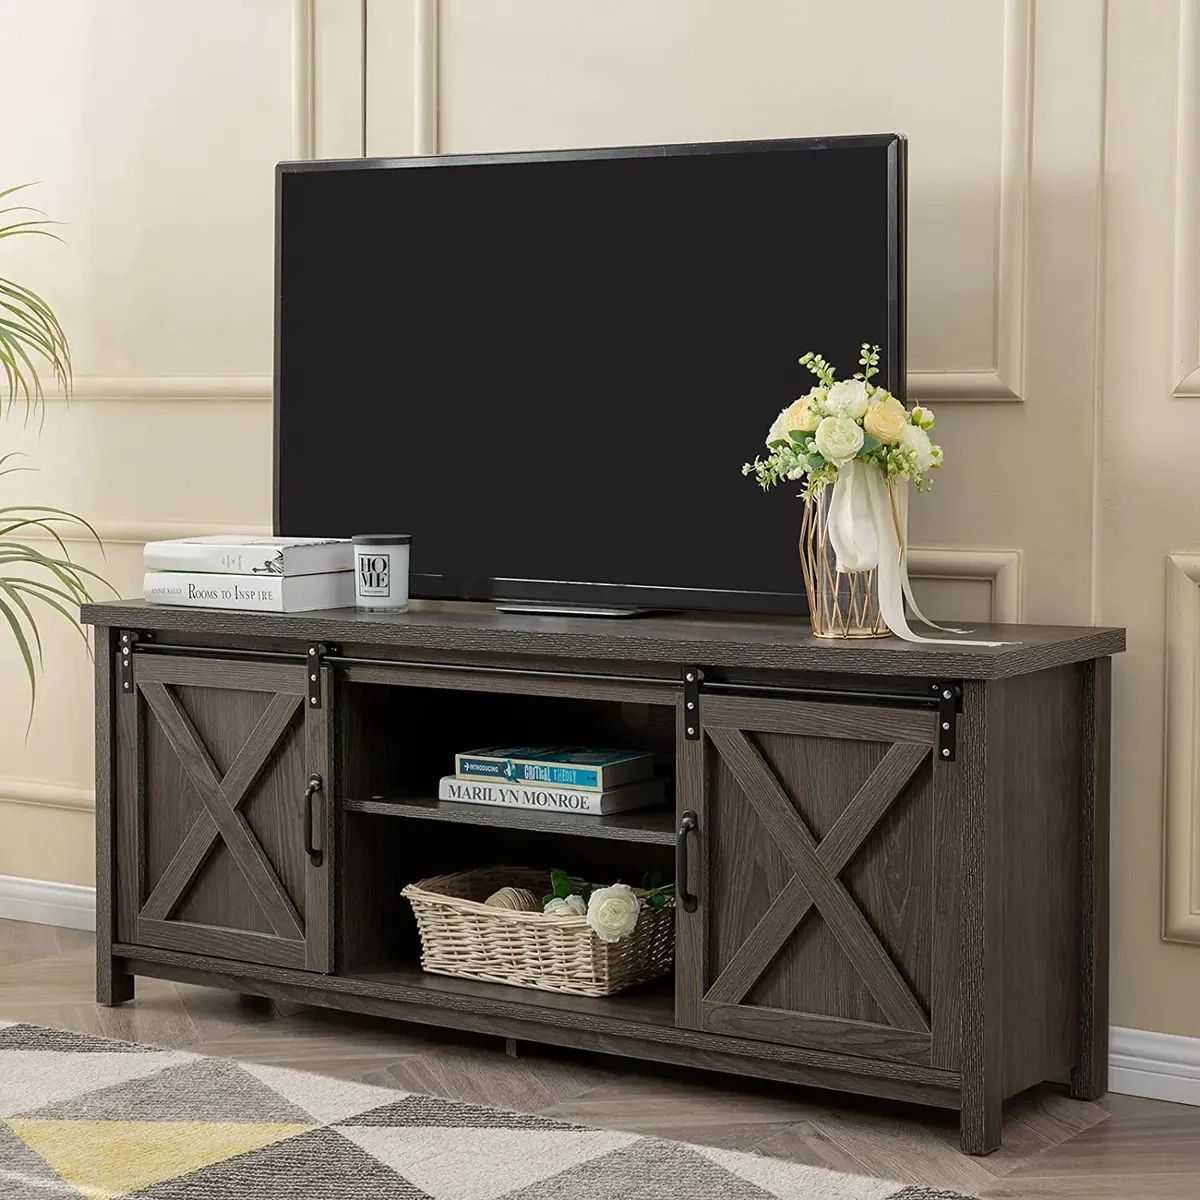 Modern Farmhouse Tv Stand With Sliding Barn Doors, Media Entertainment  Center Co | Ebay Intended For Barn Door Media Tv Stands (View 3 of 15)